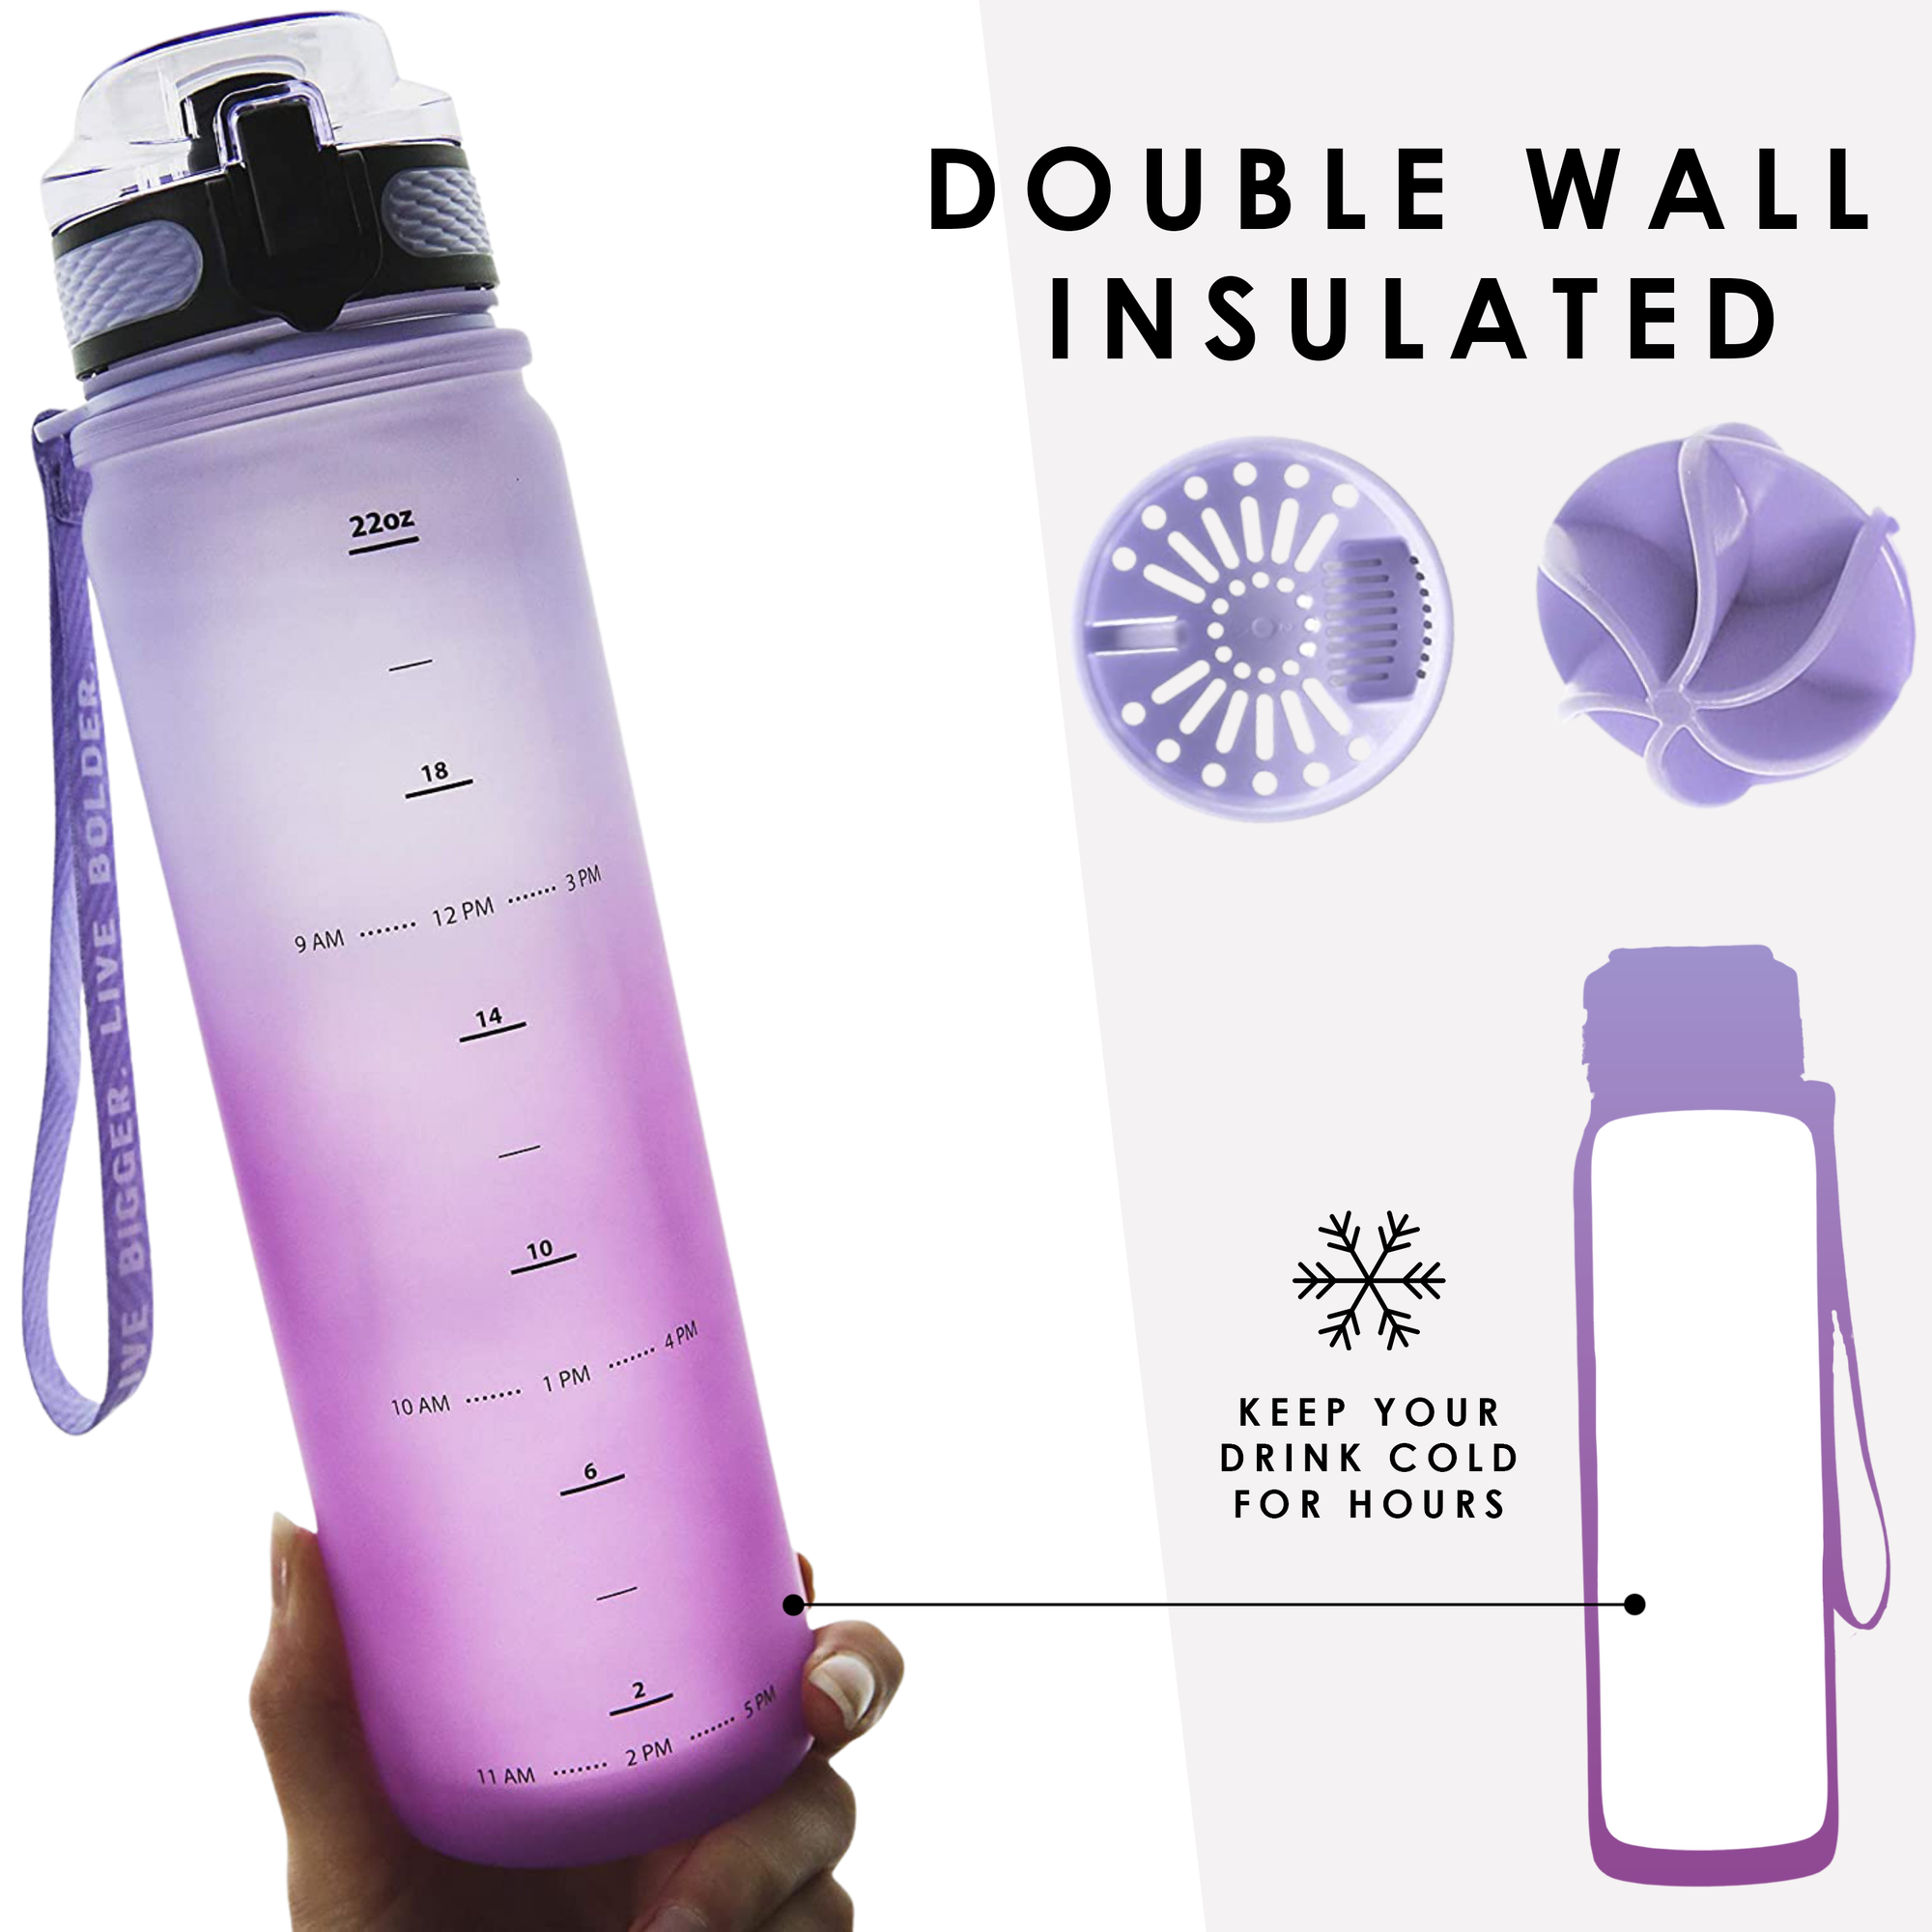 Live Infinitely Gym Water Bottle with Time Marker Fruit Infuser